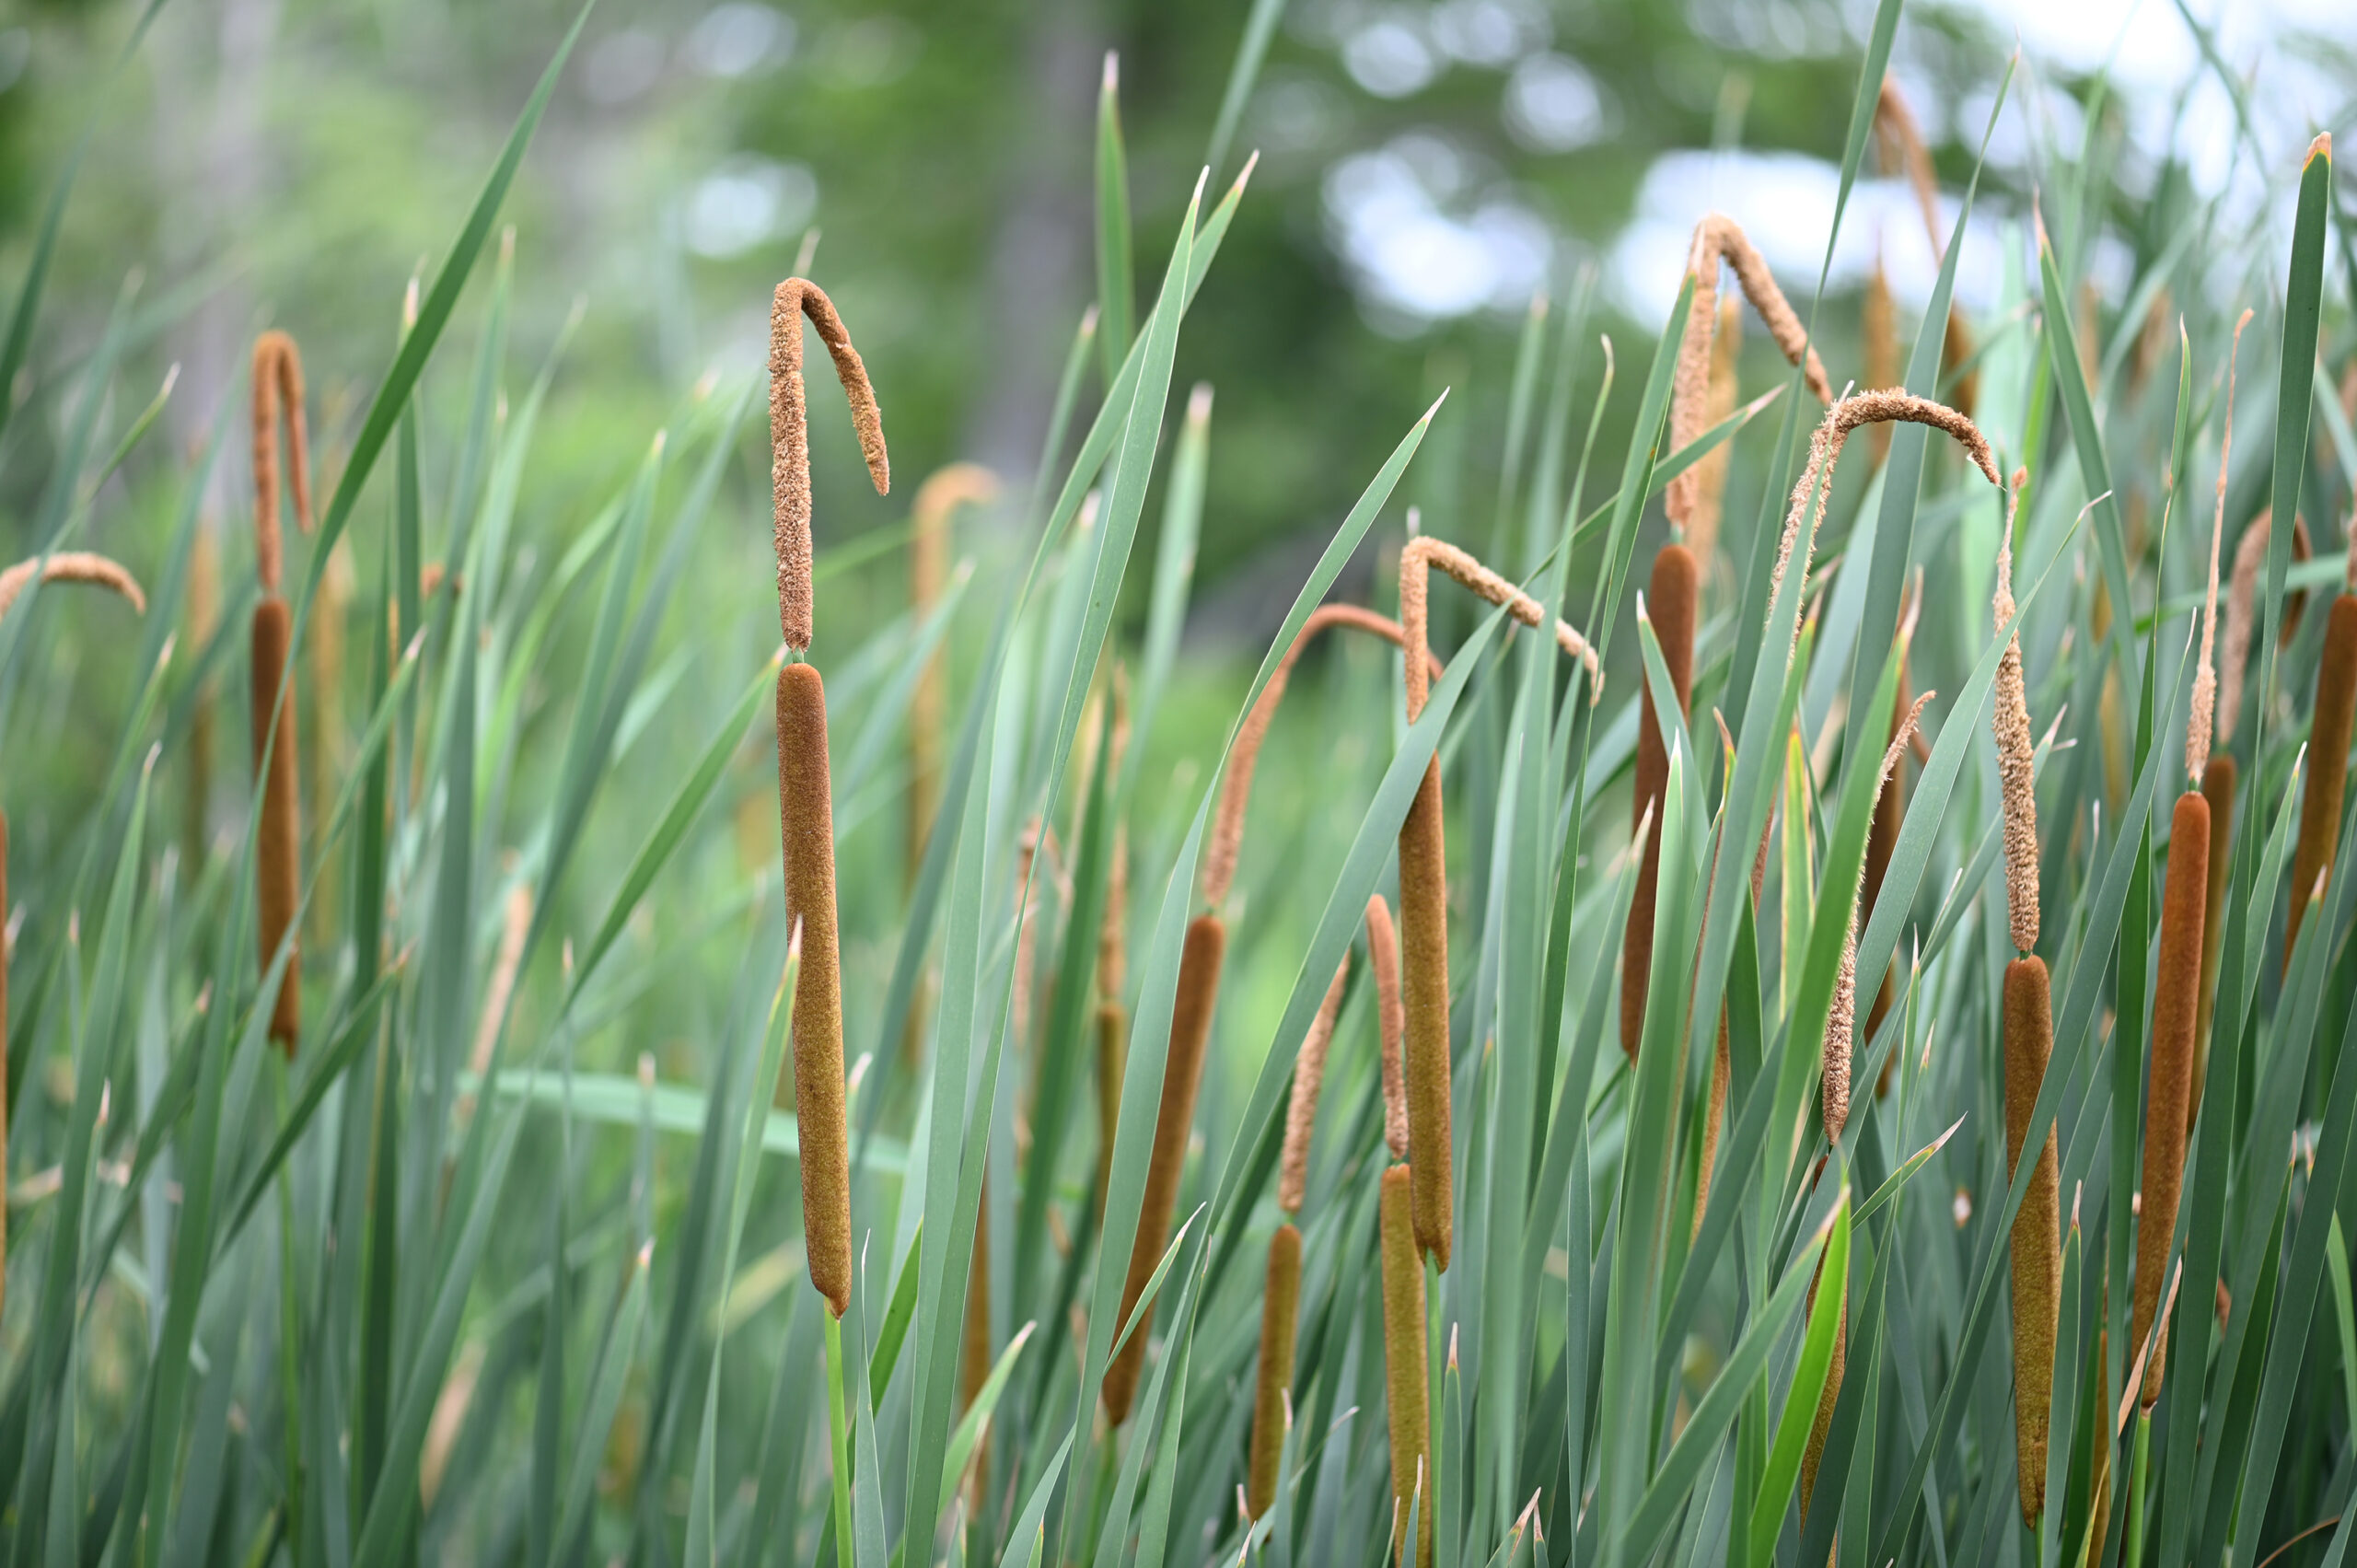 Photograph of Typha latifolia by Heather